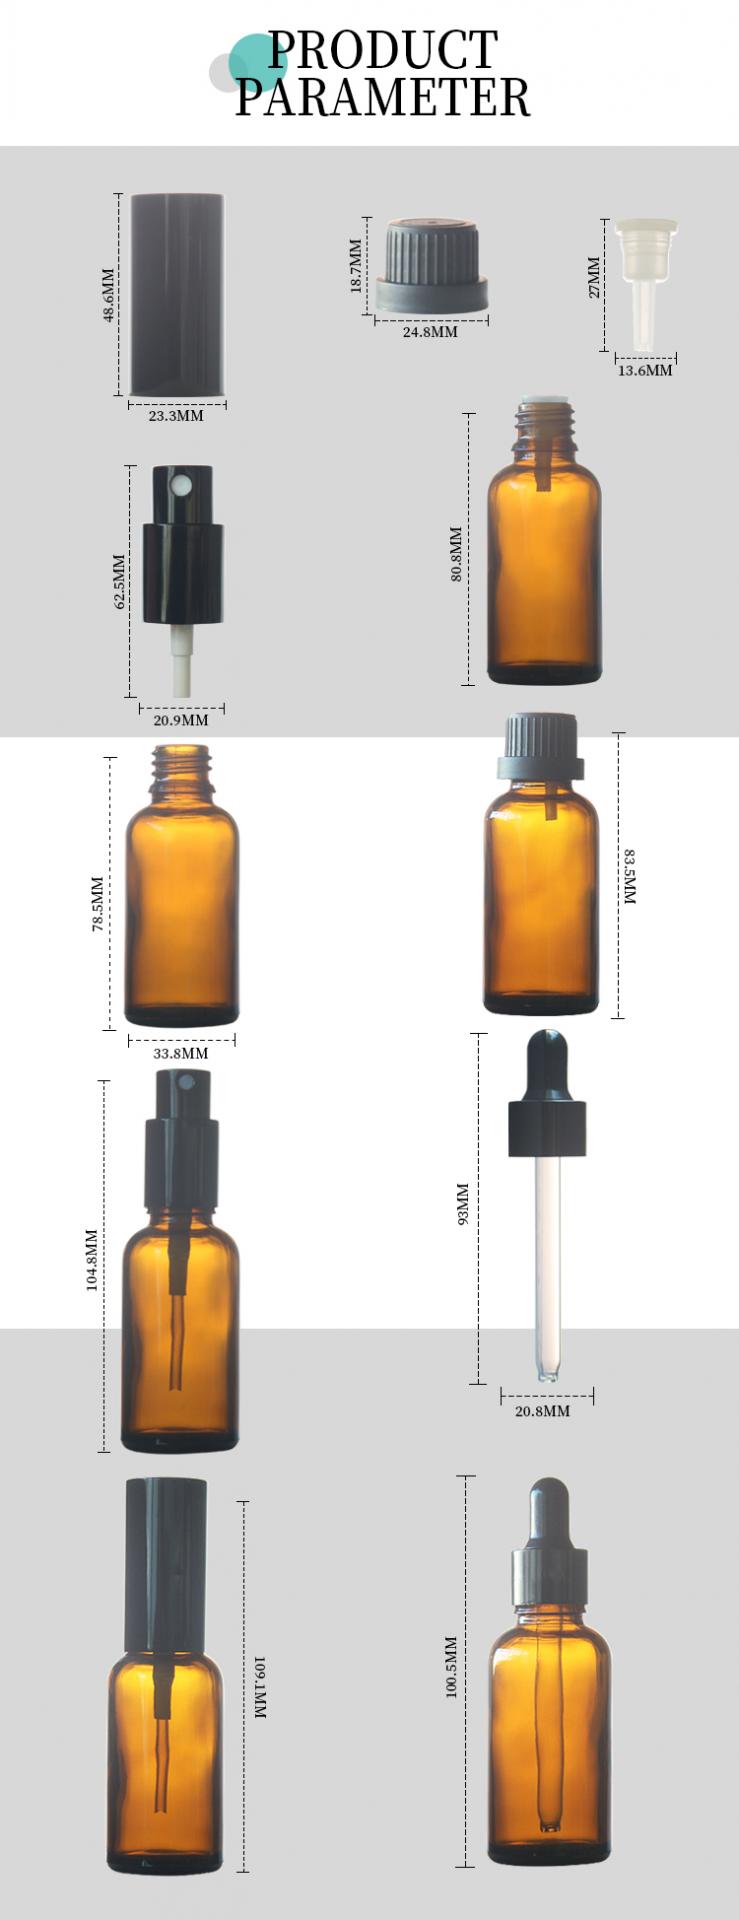 30ml glass dropper bottle used for essential oils